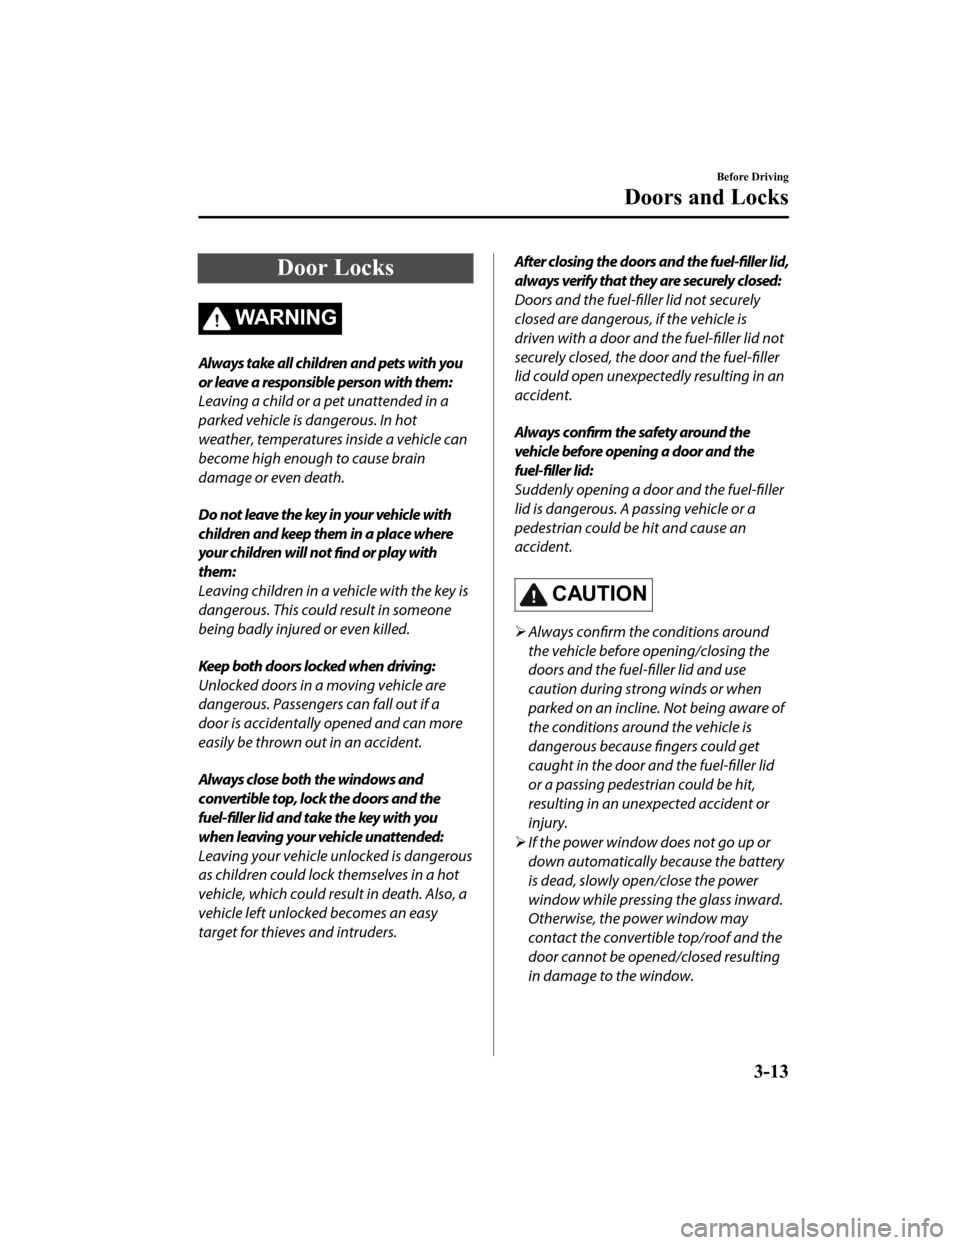 MAZDA MODEL MX-5 2020  Owners Manual (in English) Door Locks
WARNING
Always take all children and pets with you
or leave a responsible person with them:
Leaving a child or a pet unattended in a
parked vehicle is dangerous. In hot
weather, temperature